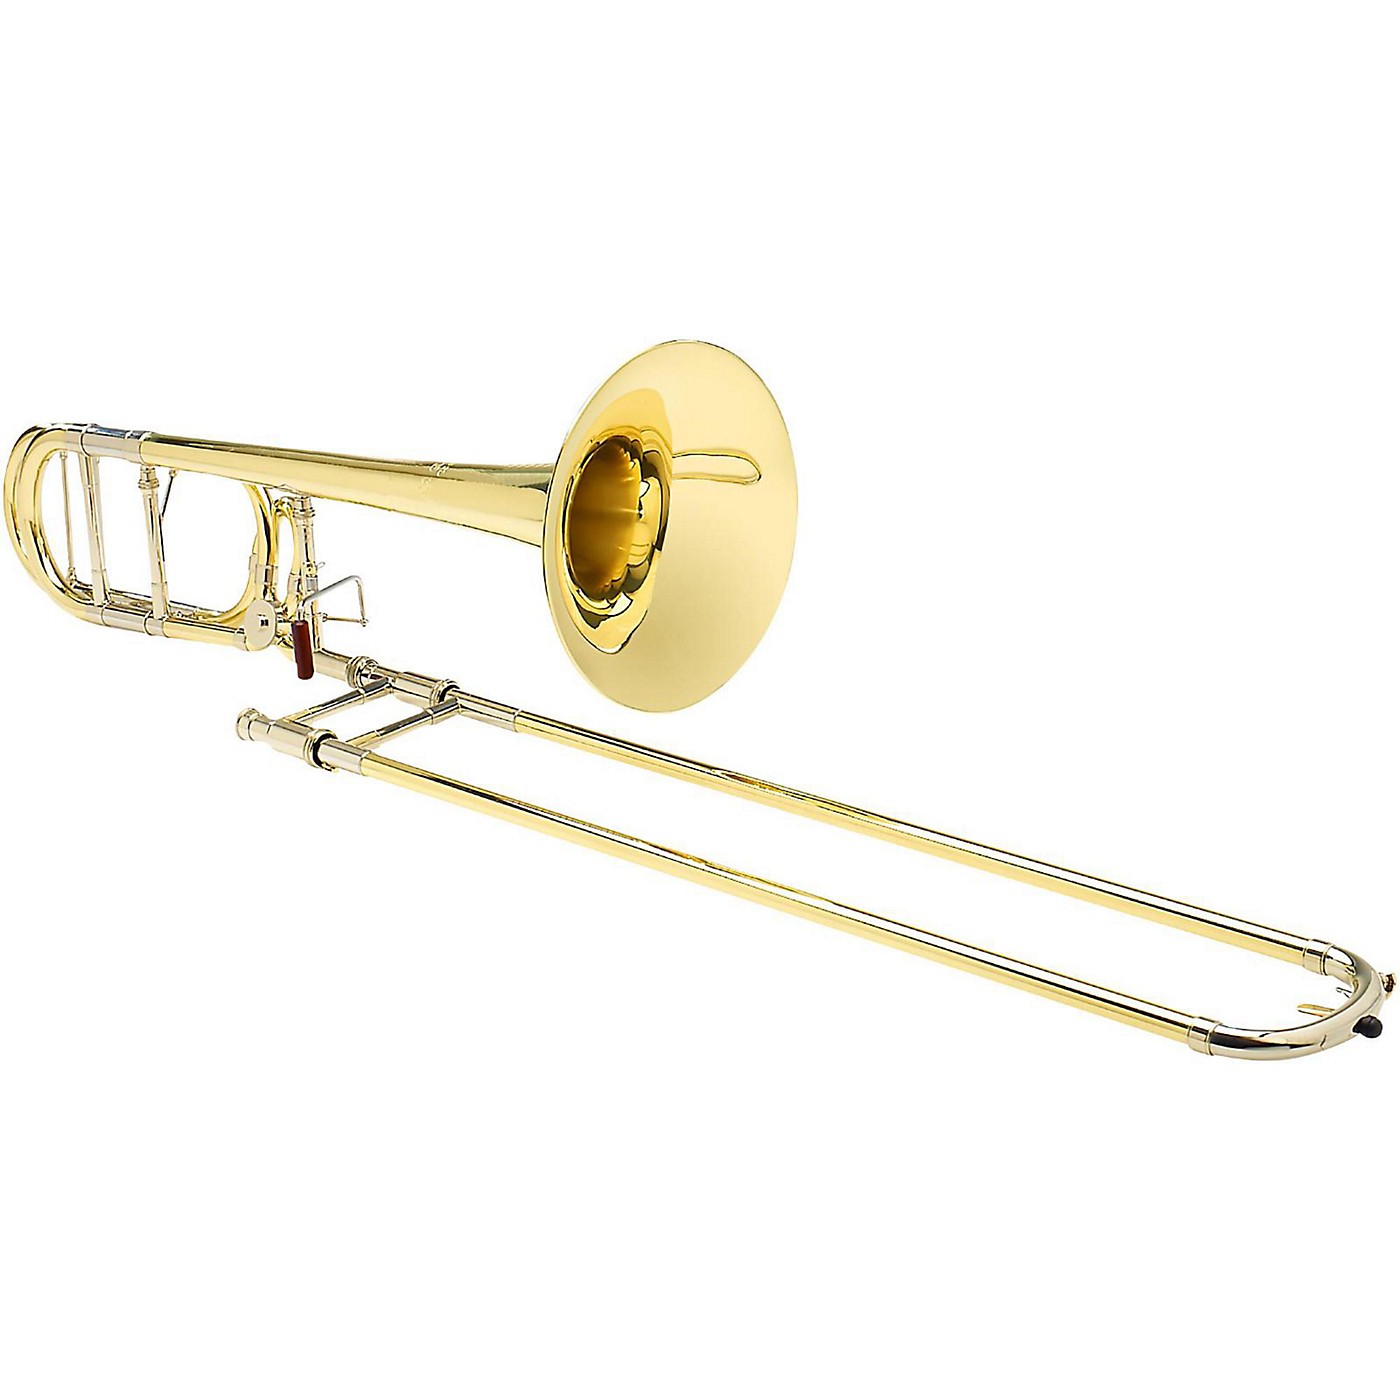 S.E. SHIRES TBQ30R Q-Series Professional F-Attachment Trombone Lacquer Yellow Brass Bell thumbnail